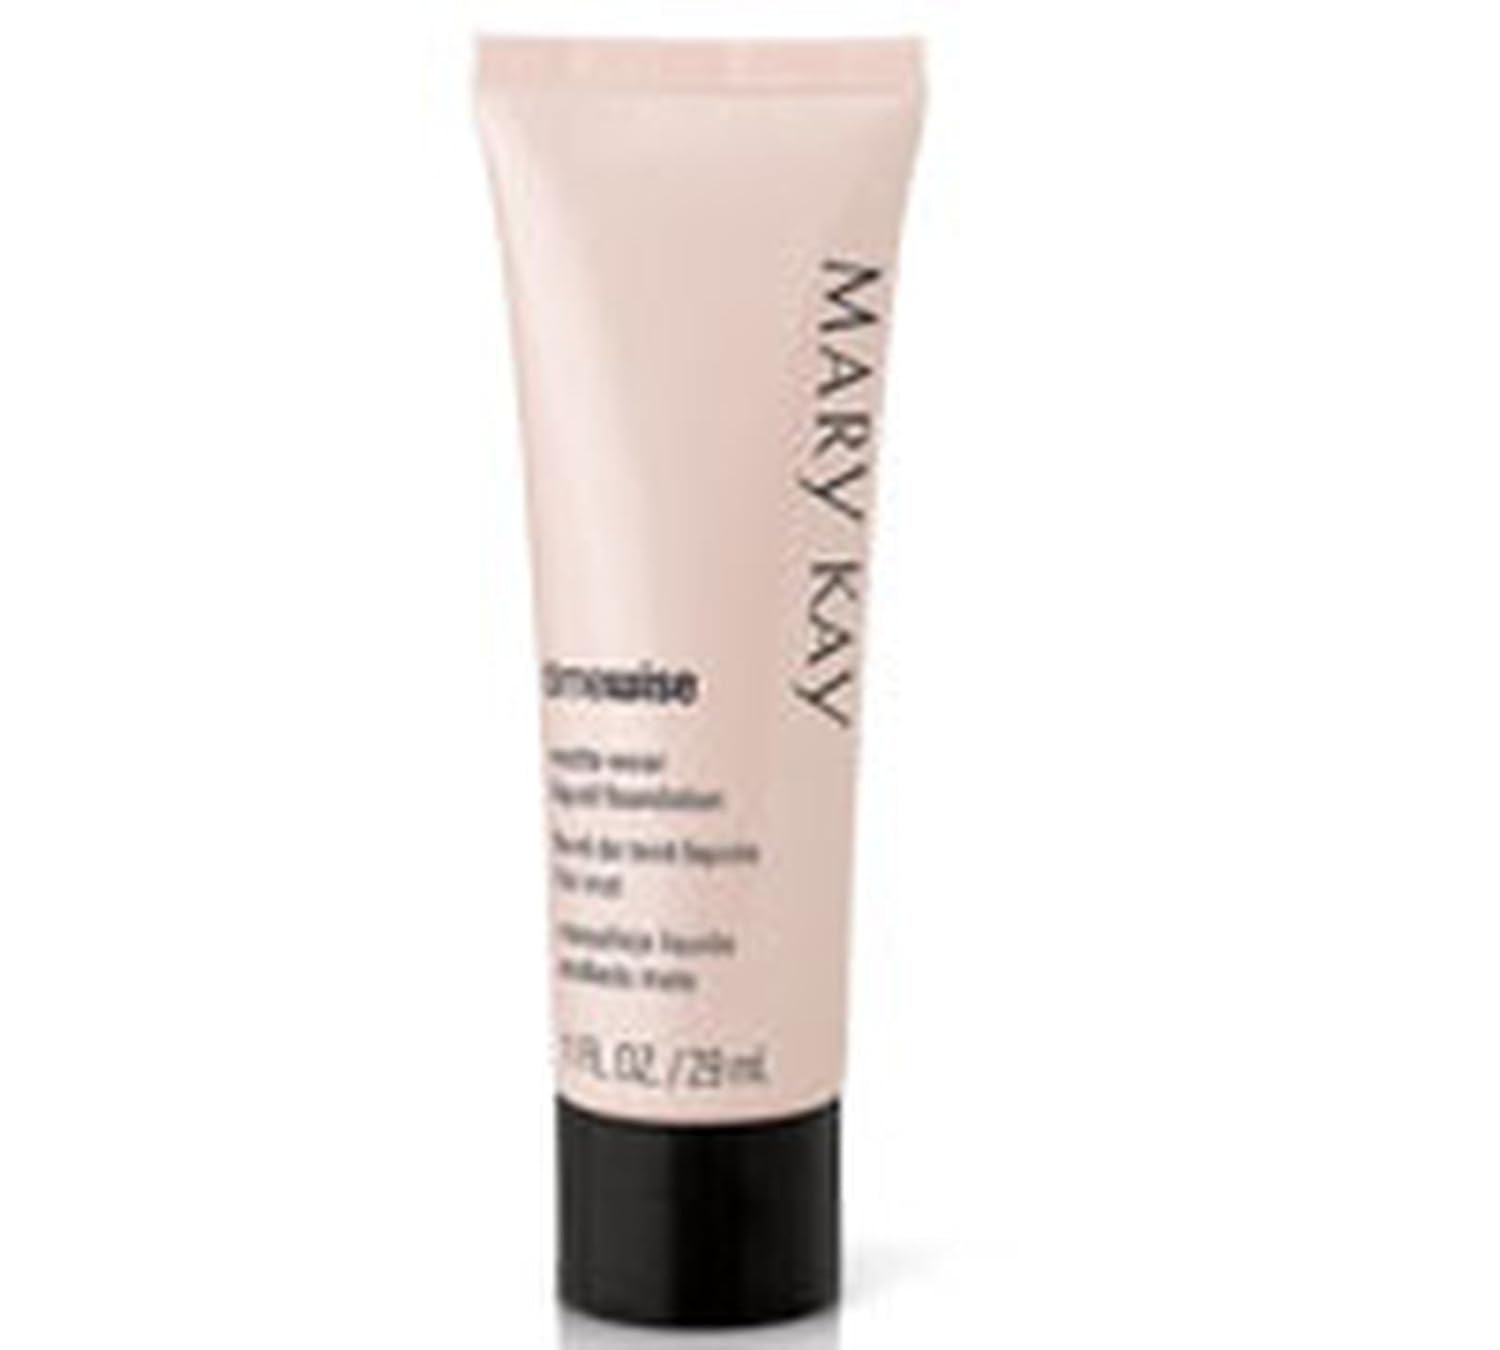 mary kay timewise matte wear liquid foundation review